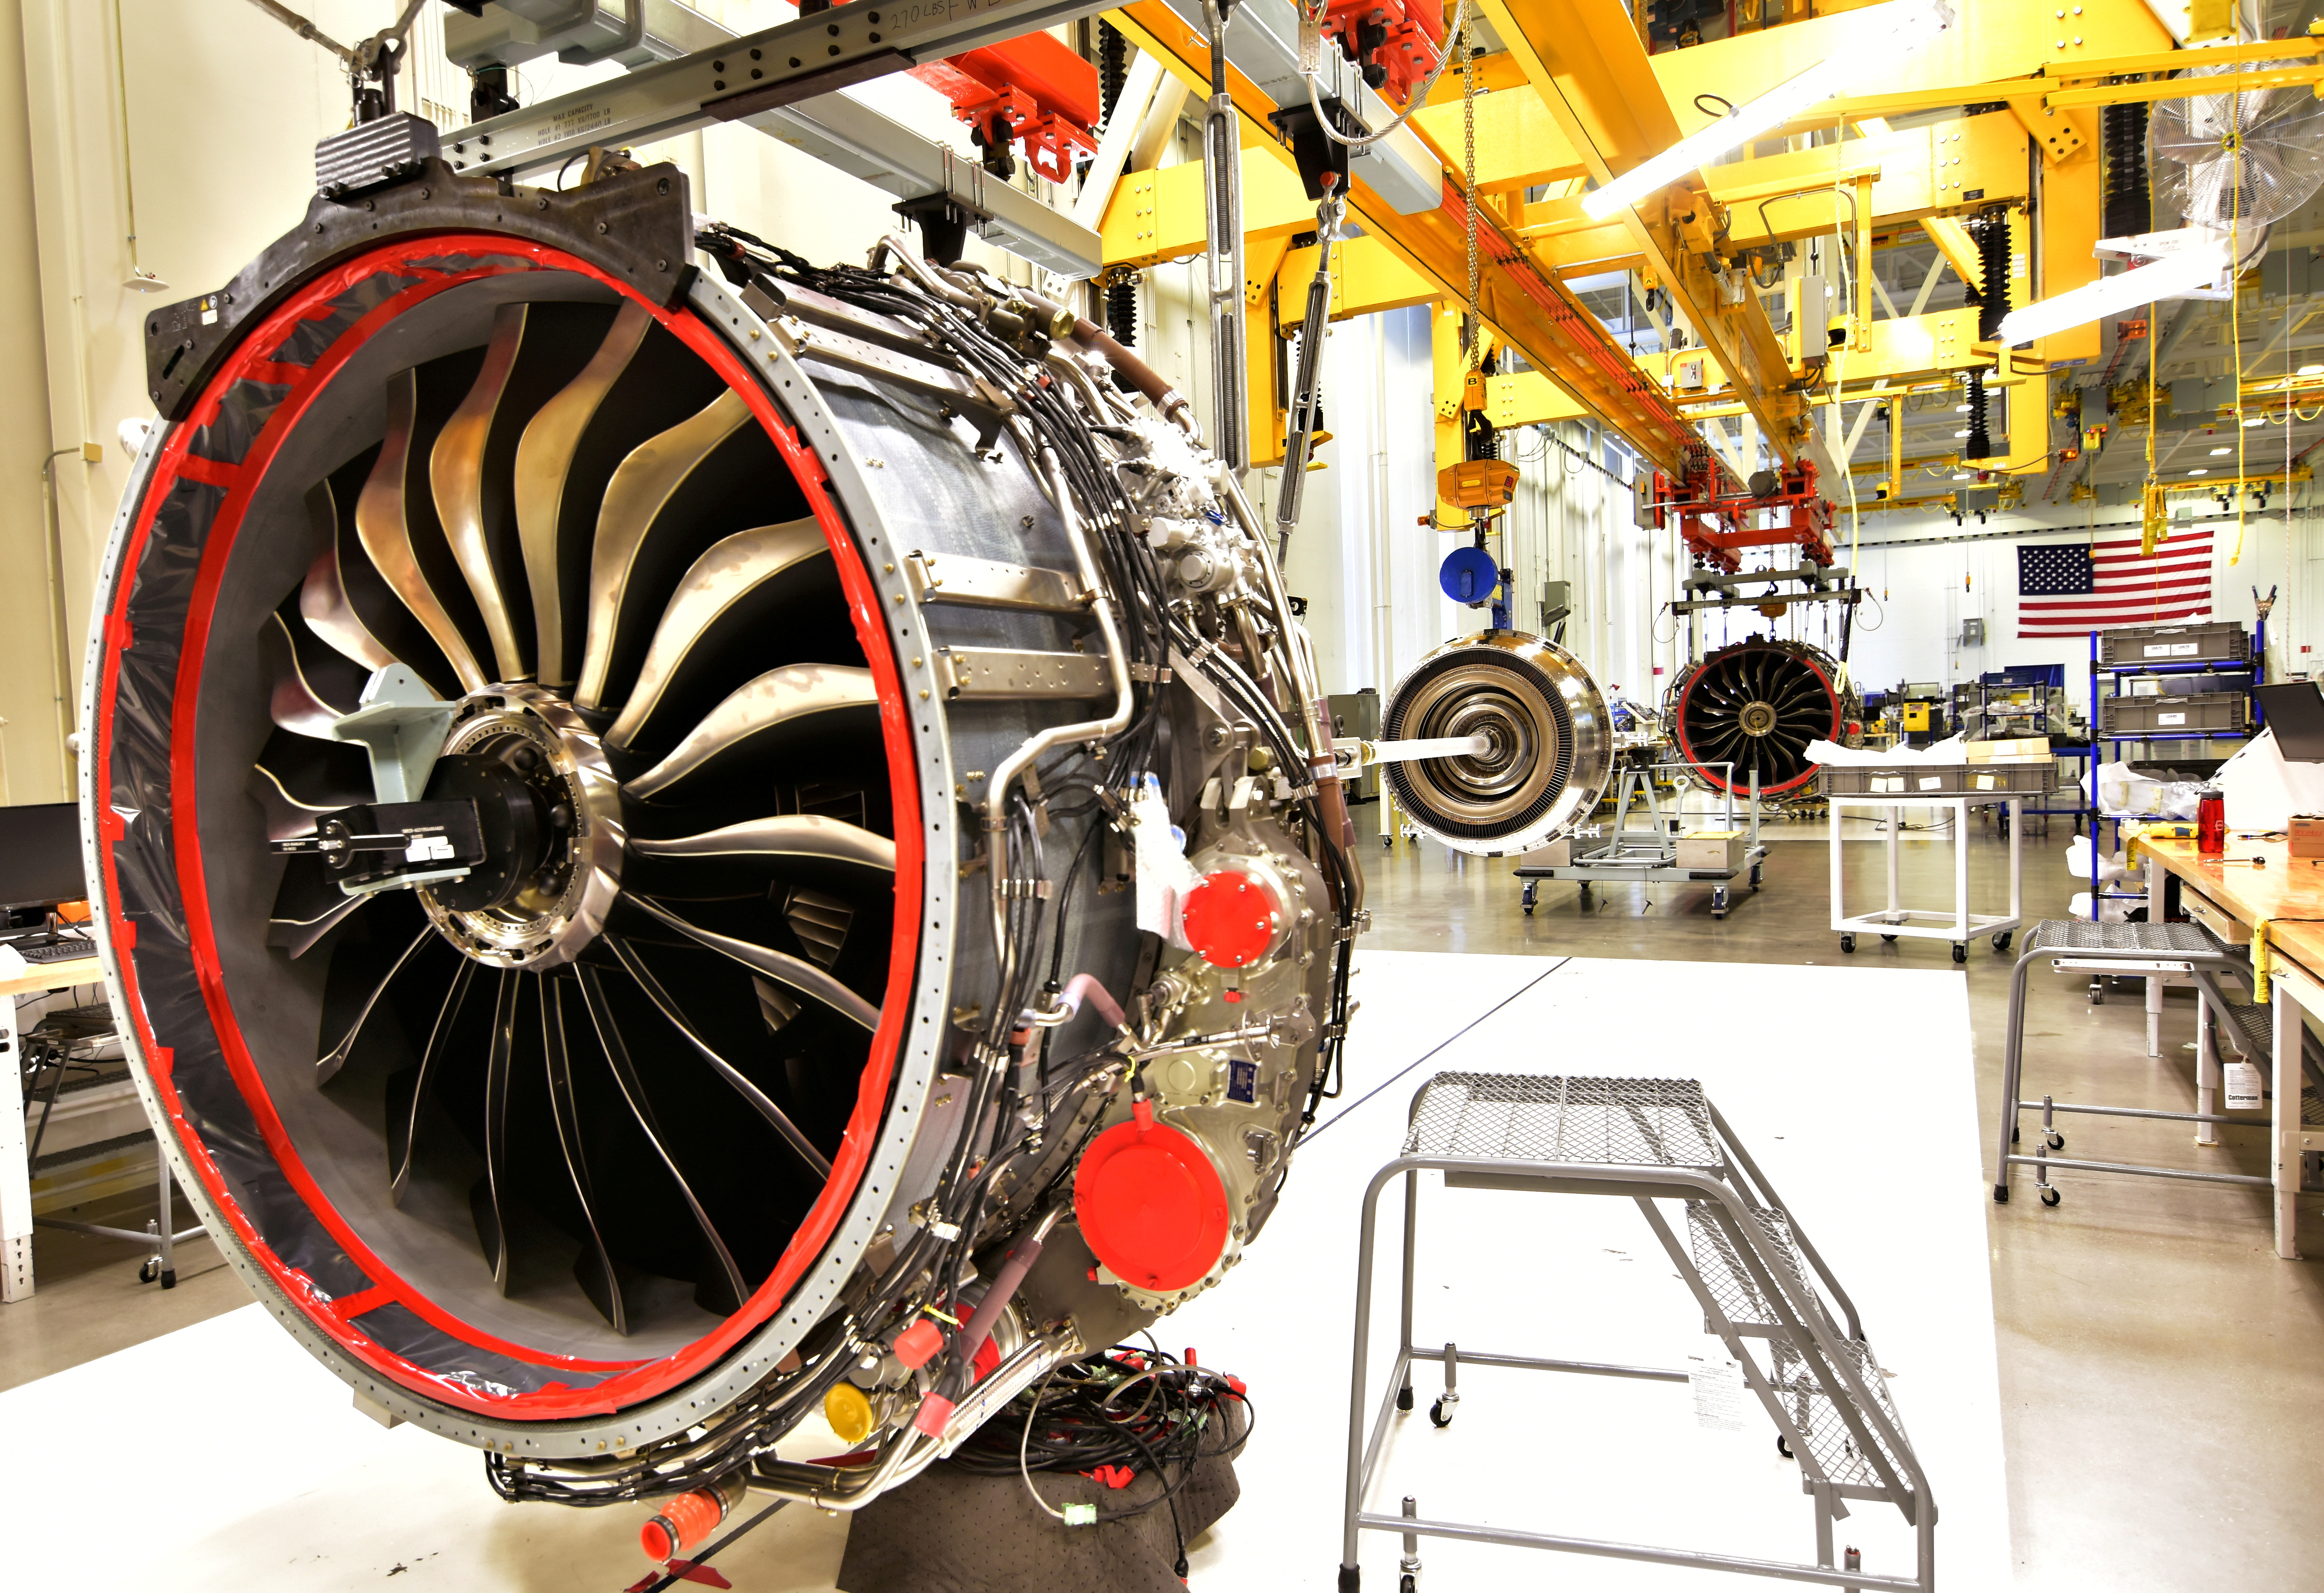 Technicians build LEAP engines for jetliners at a new, highly automated General Electric (GE) factory in Lafayette, Indiana, U.S.